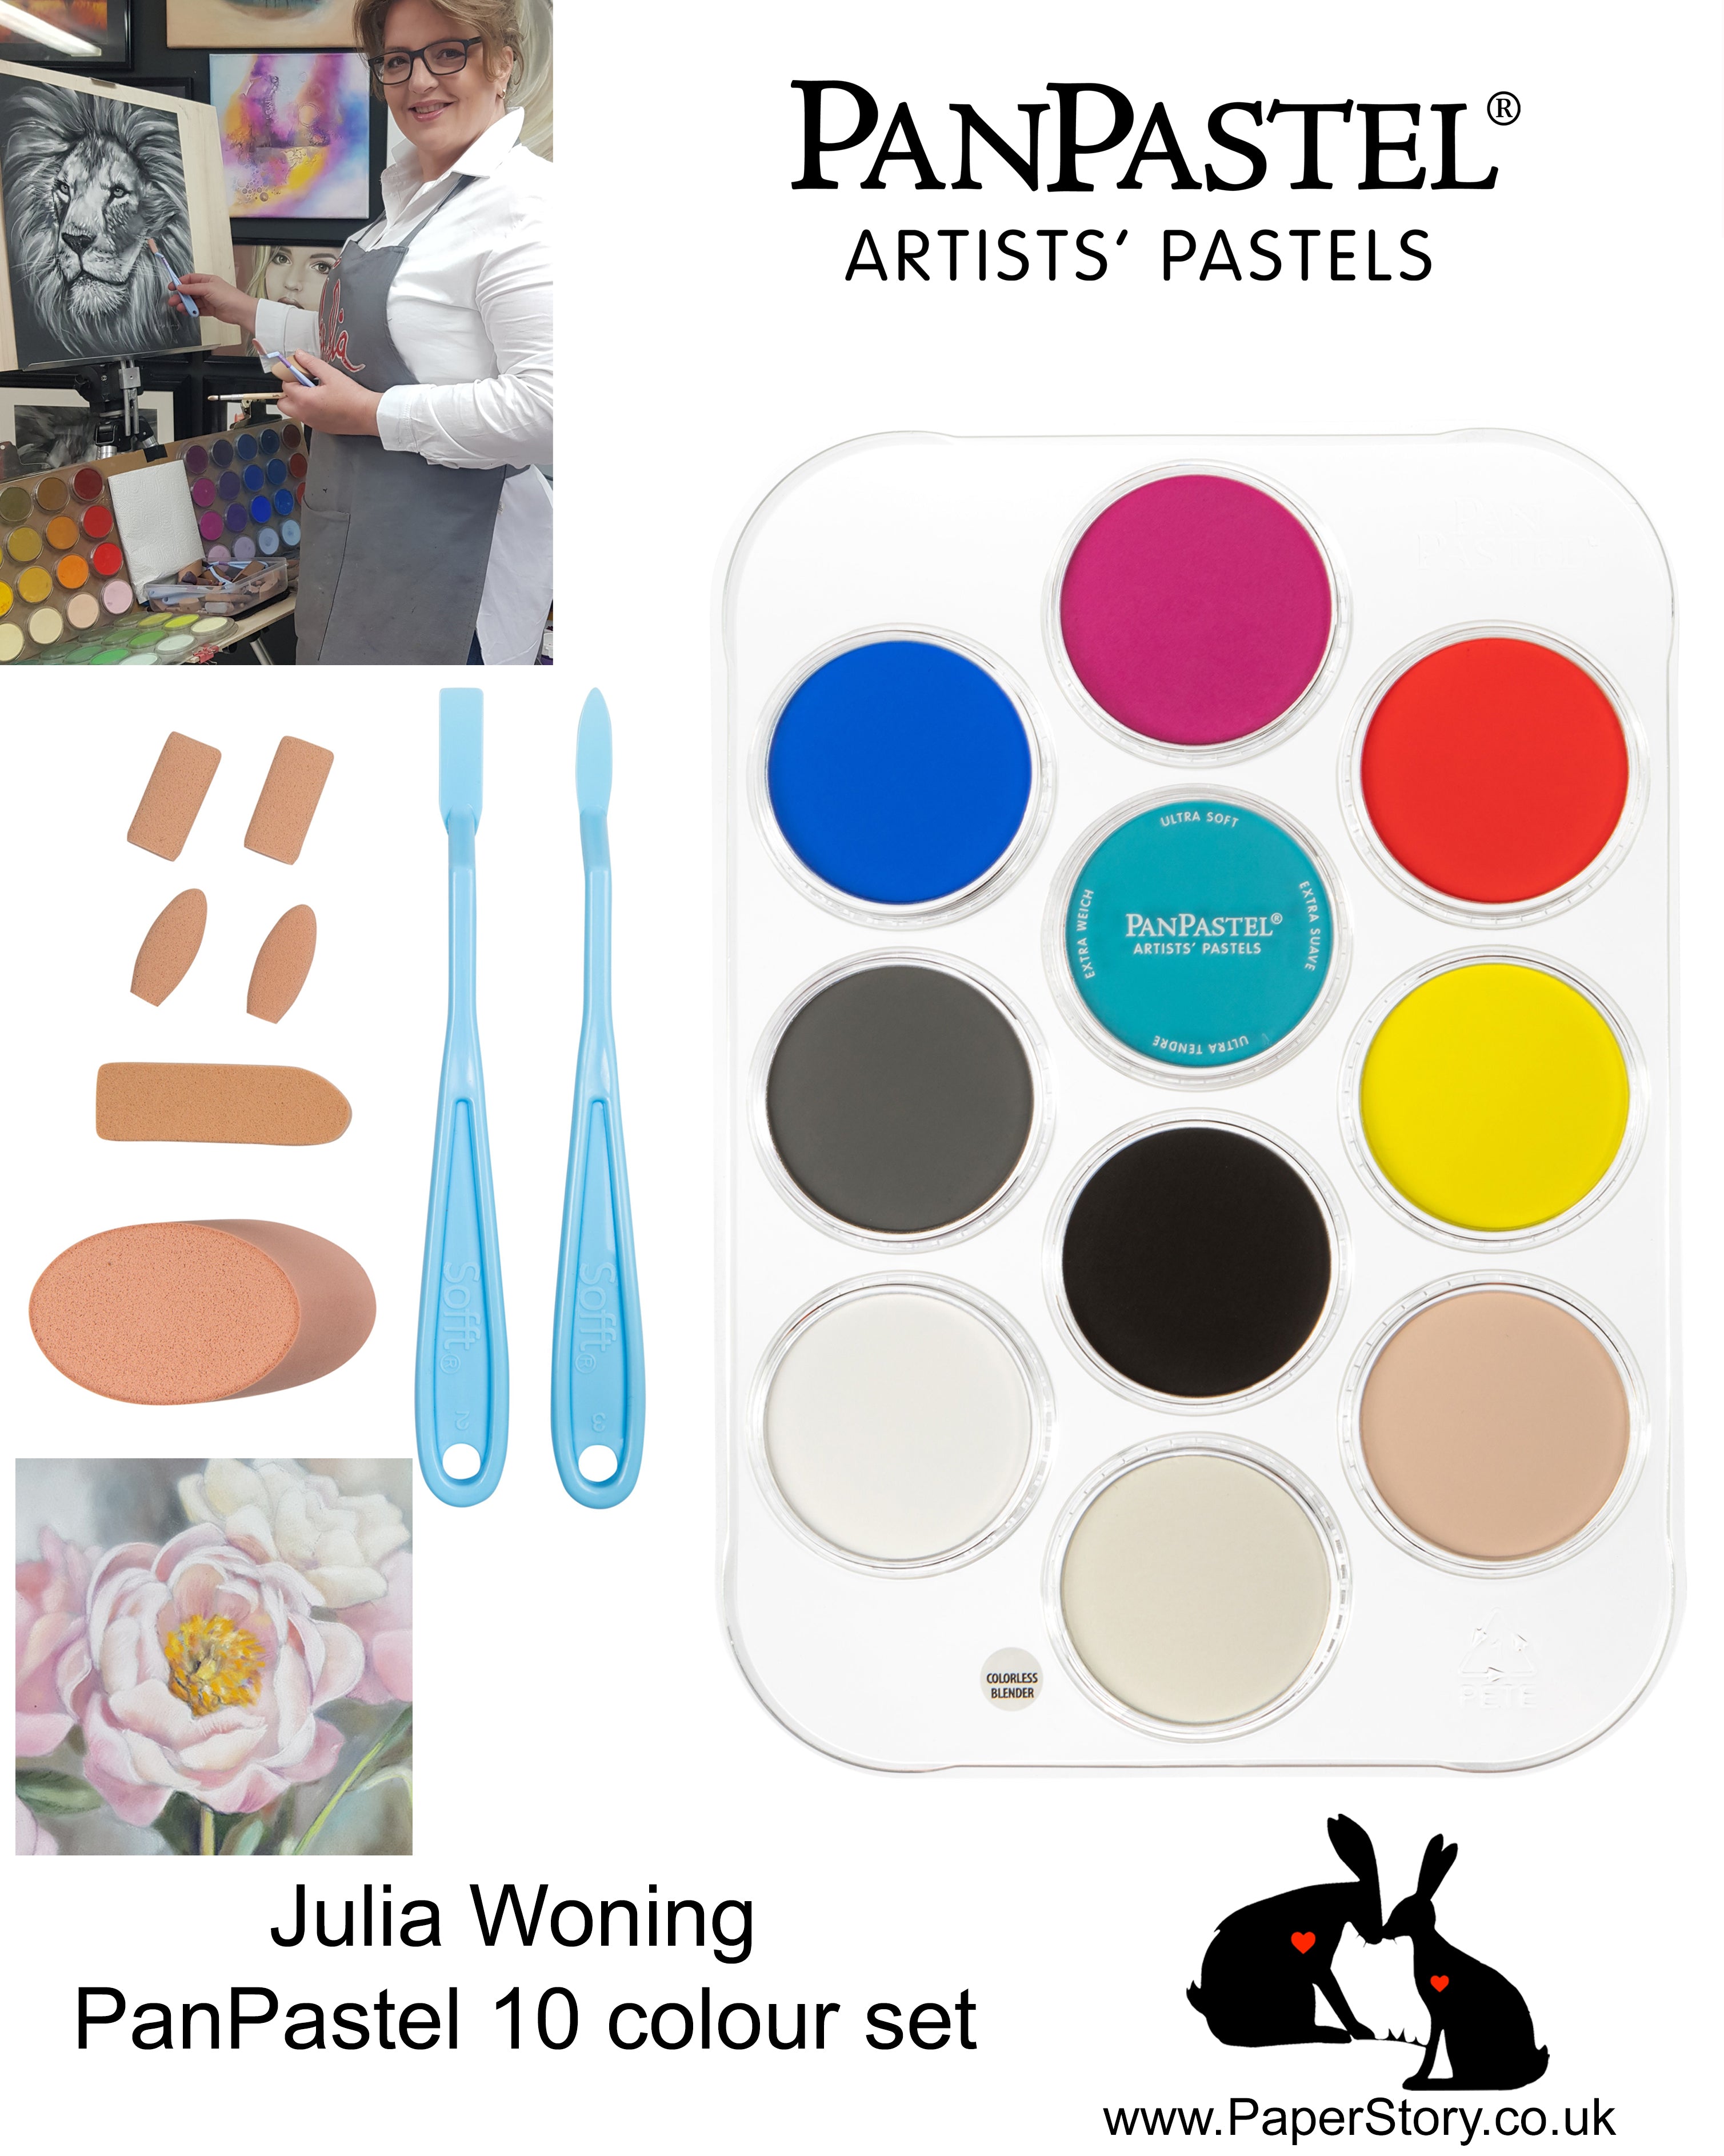 The Julia Woning PanPastel Set includes 10 PanPastel colours selected by Julia, a 10 slot palette tray, 2 Sofft Knives with covers, a finger sponge an angle slice round sponge.  It represents excellent value as you receive the Palette tray and tools worth over £28 free.